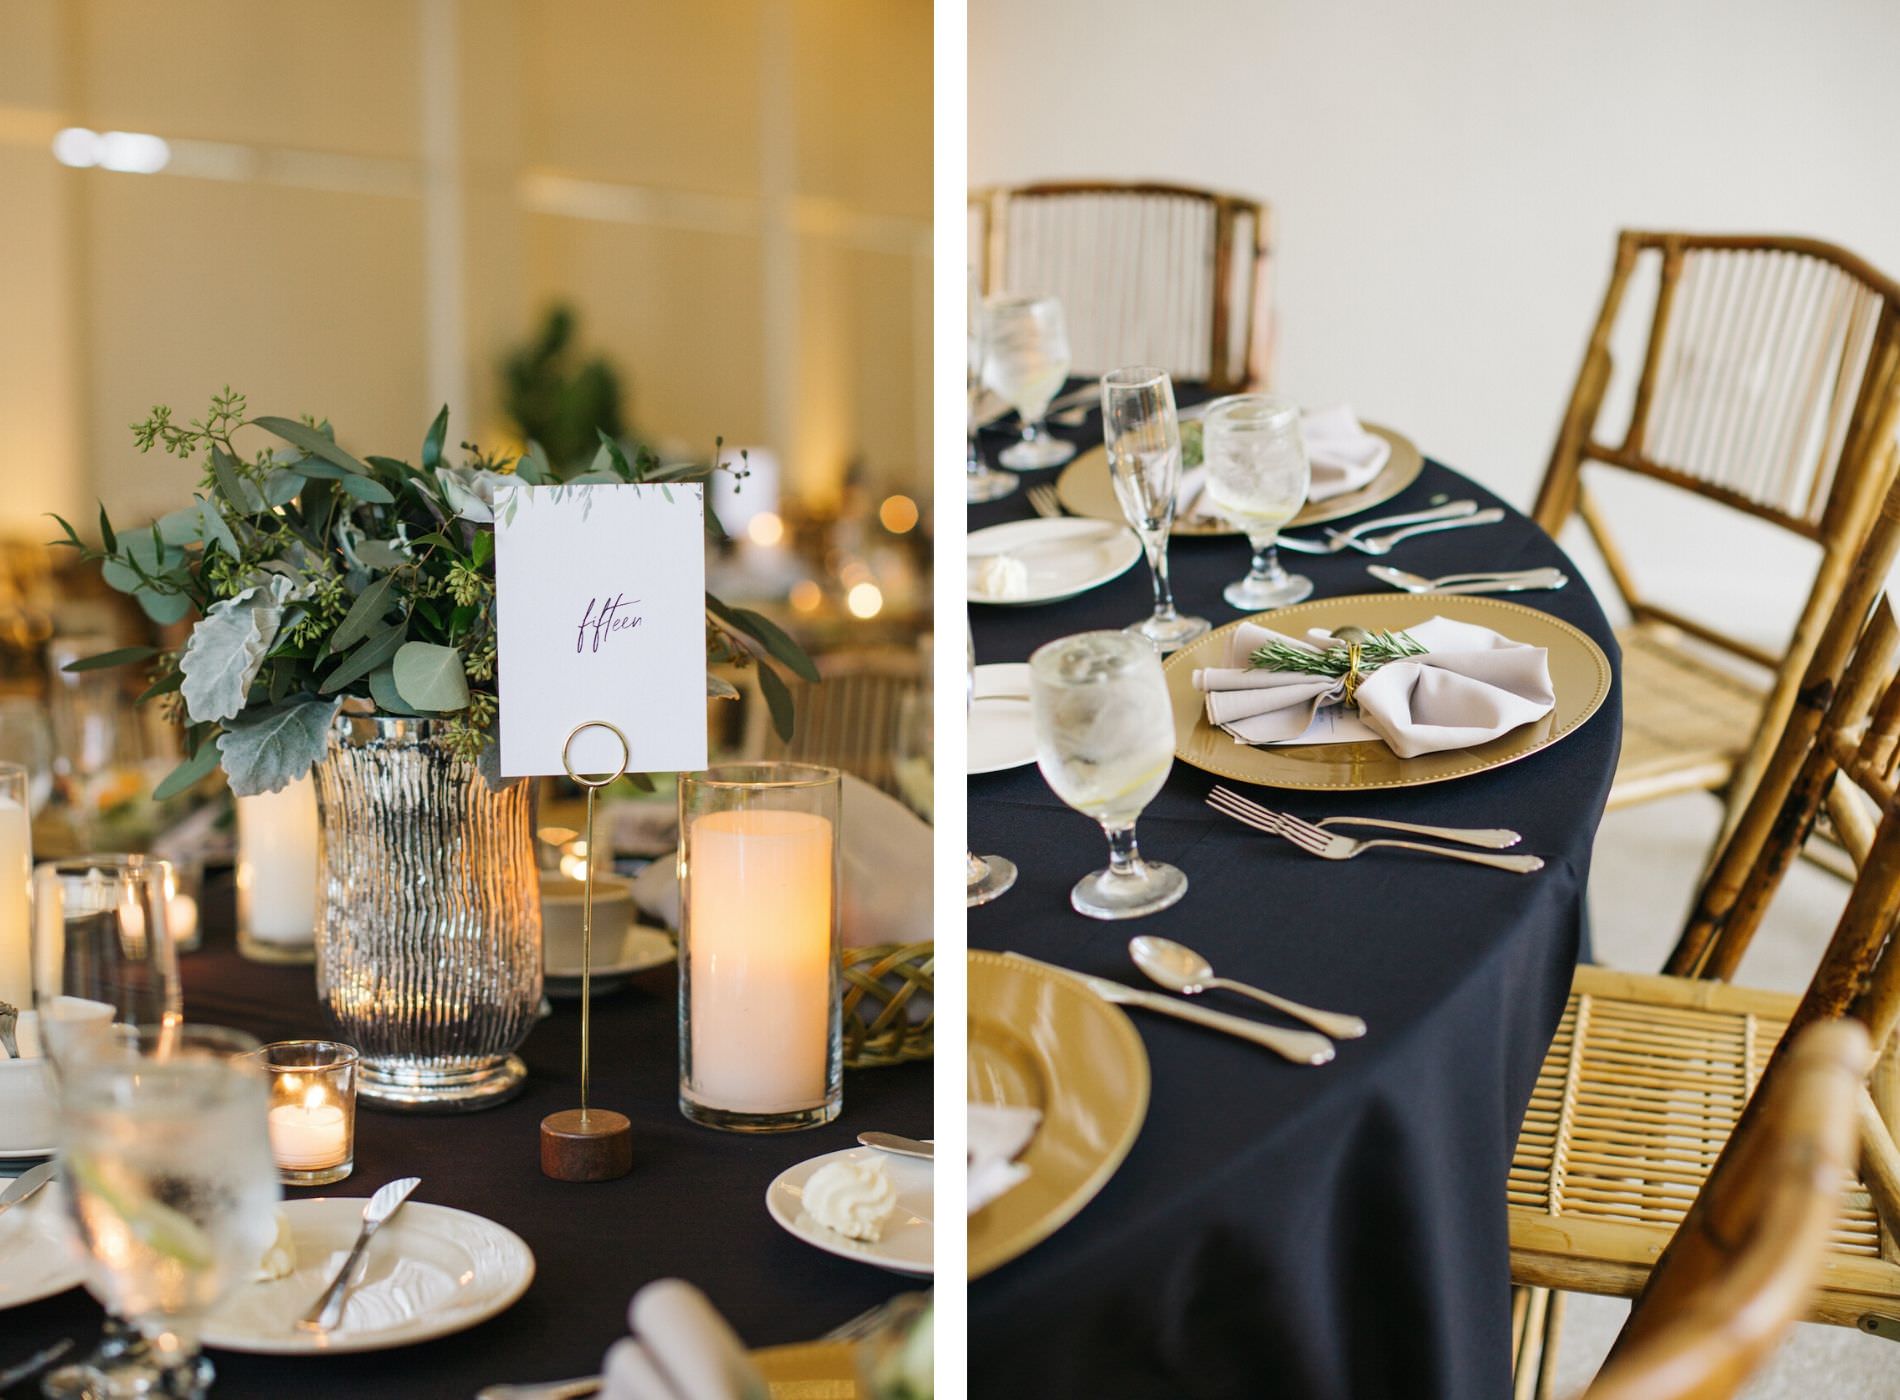 Black and White and Gold Wedding Reception with Natural Wood Bamboo Chairs and Place Setting with Black Table Linen and Gold Charger Plate and Taupe Napkin Fan accented with Fresh Rosemary Herb Sprig and Wedding Menu Card | Mercury Glass Vase Centerpiece with Repurposed Bridesmaid Bouquet of Eucalyptus Greenery and Candles